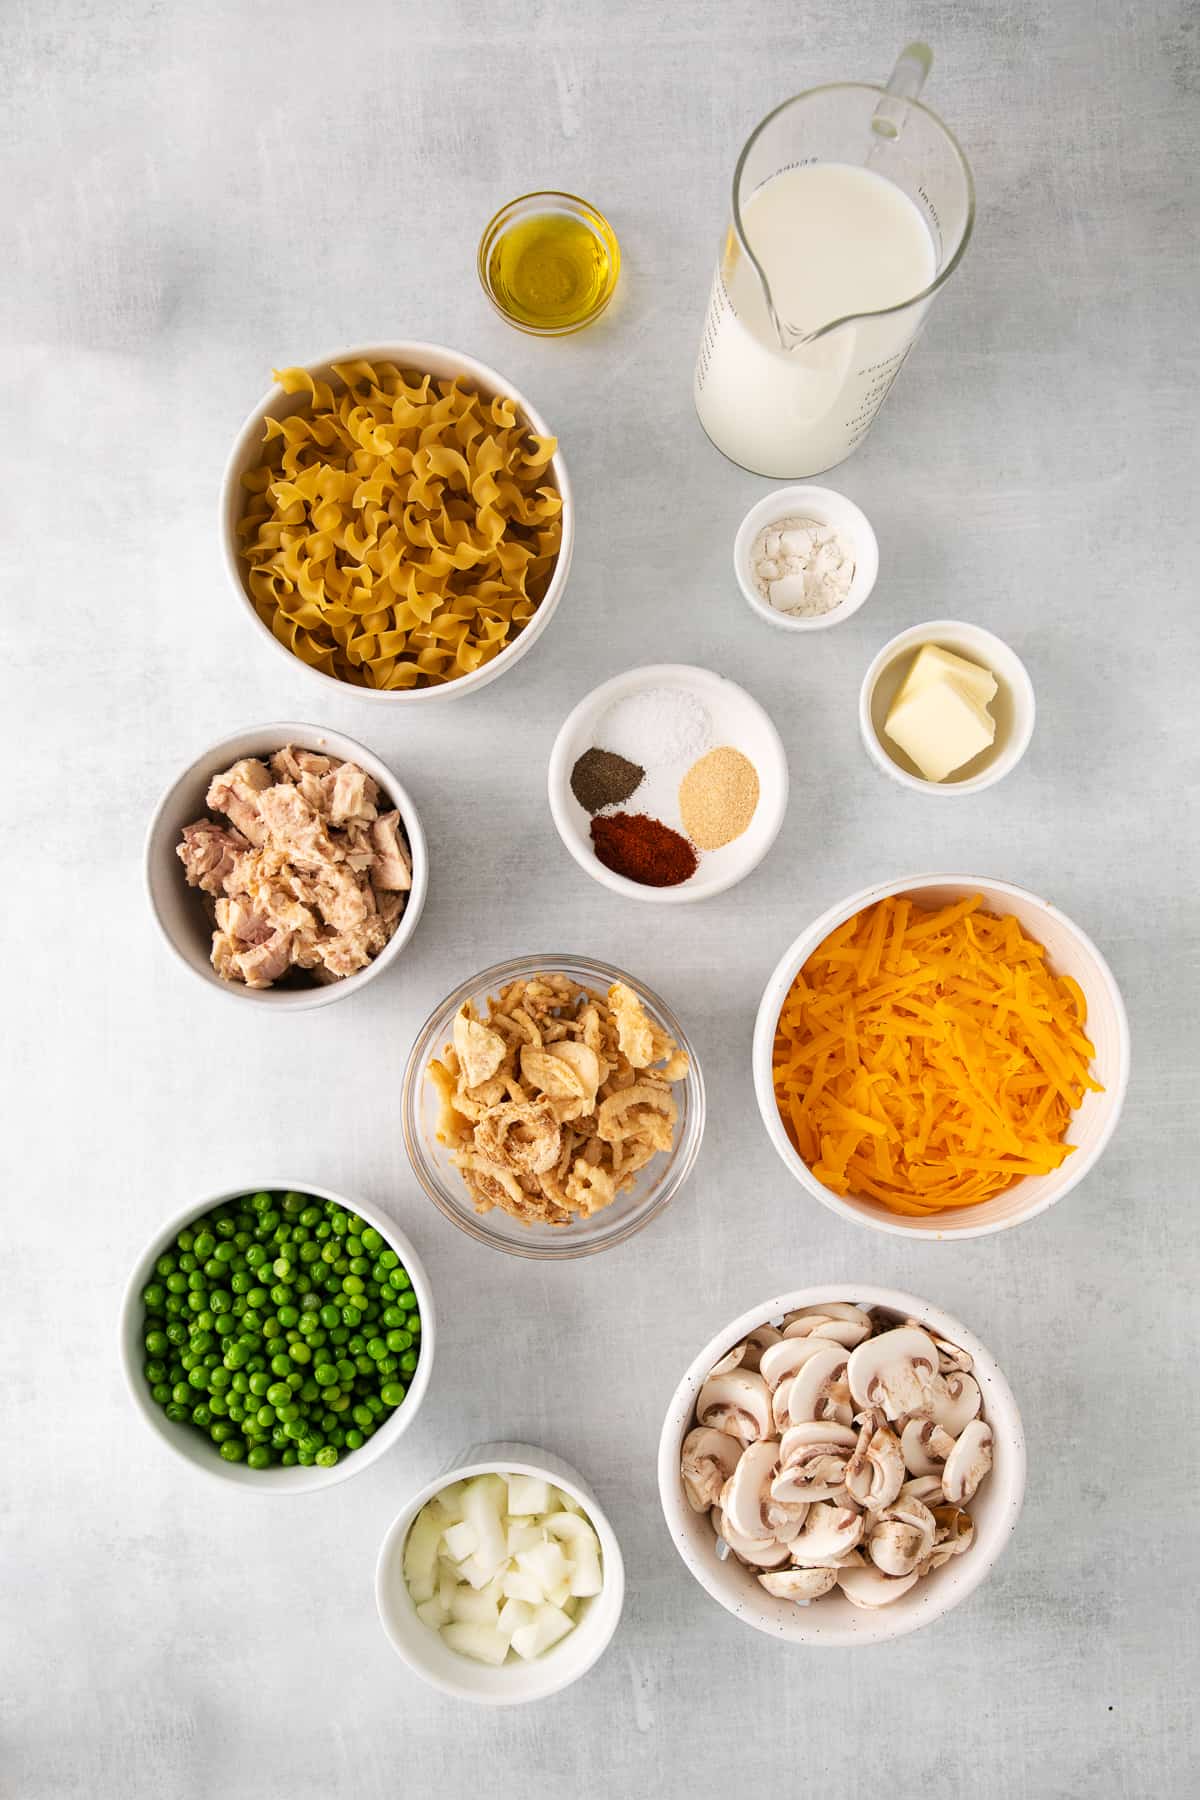 Ingredients for tuna noodle casserole in bowls.